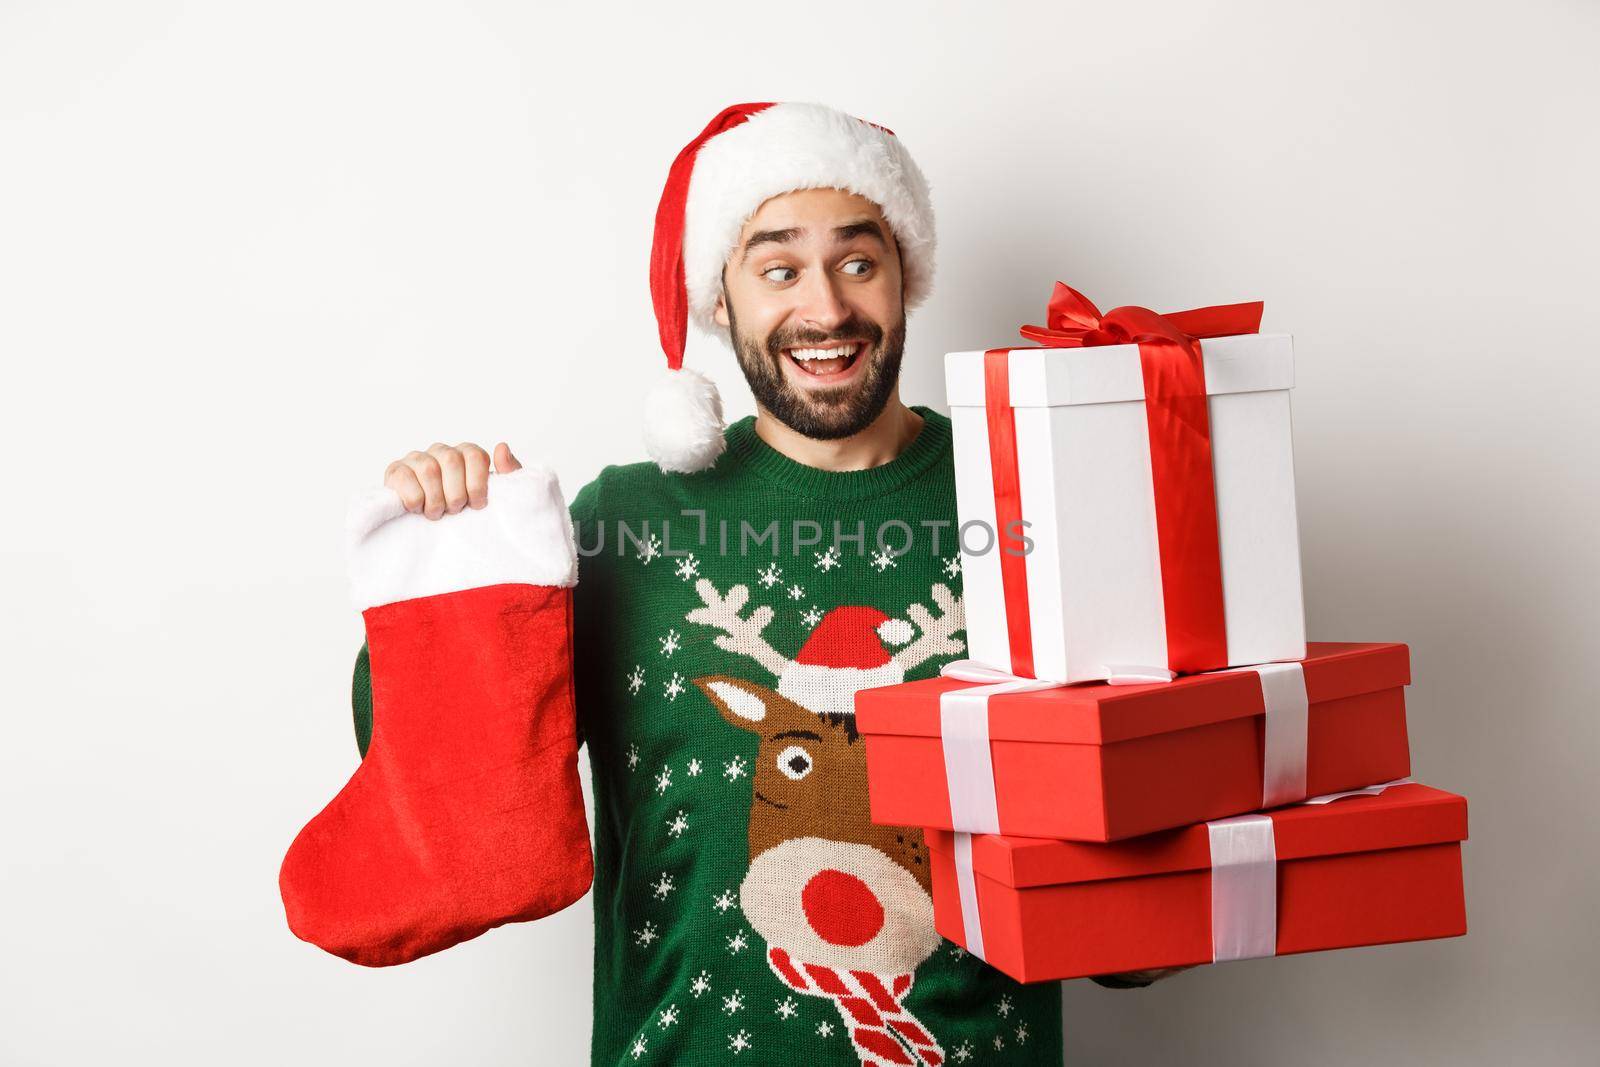 Xmas and winter holidays concept. Excited man holding christmas sock and gift boxes, celebrating New Year, standing over white background.